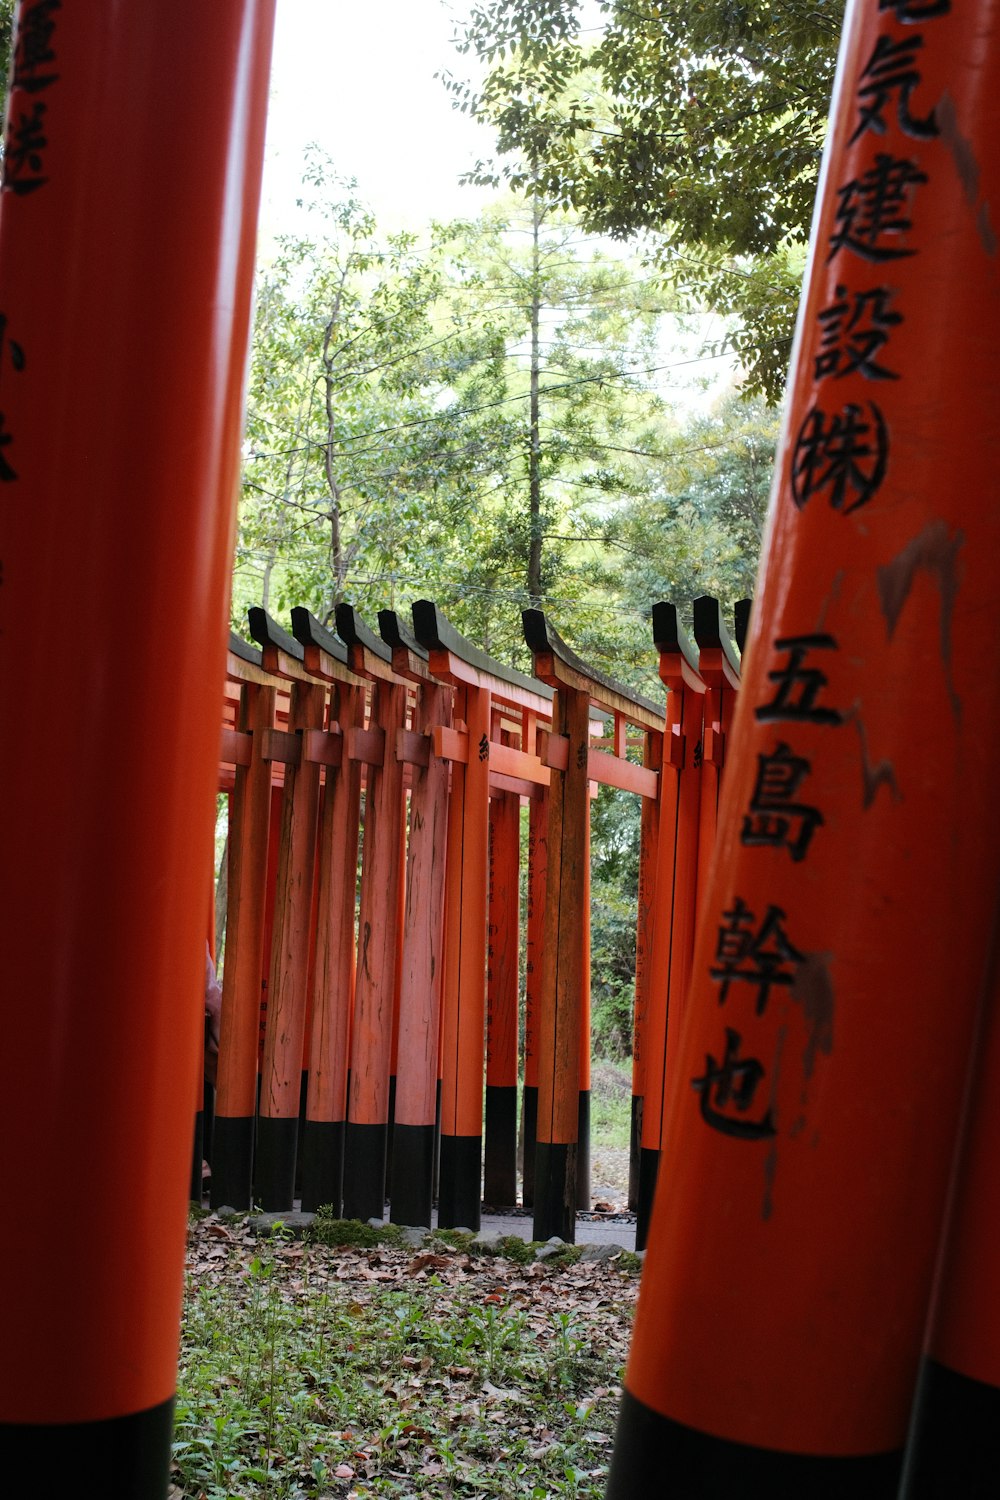 a group of orange and black poles with writing on them